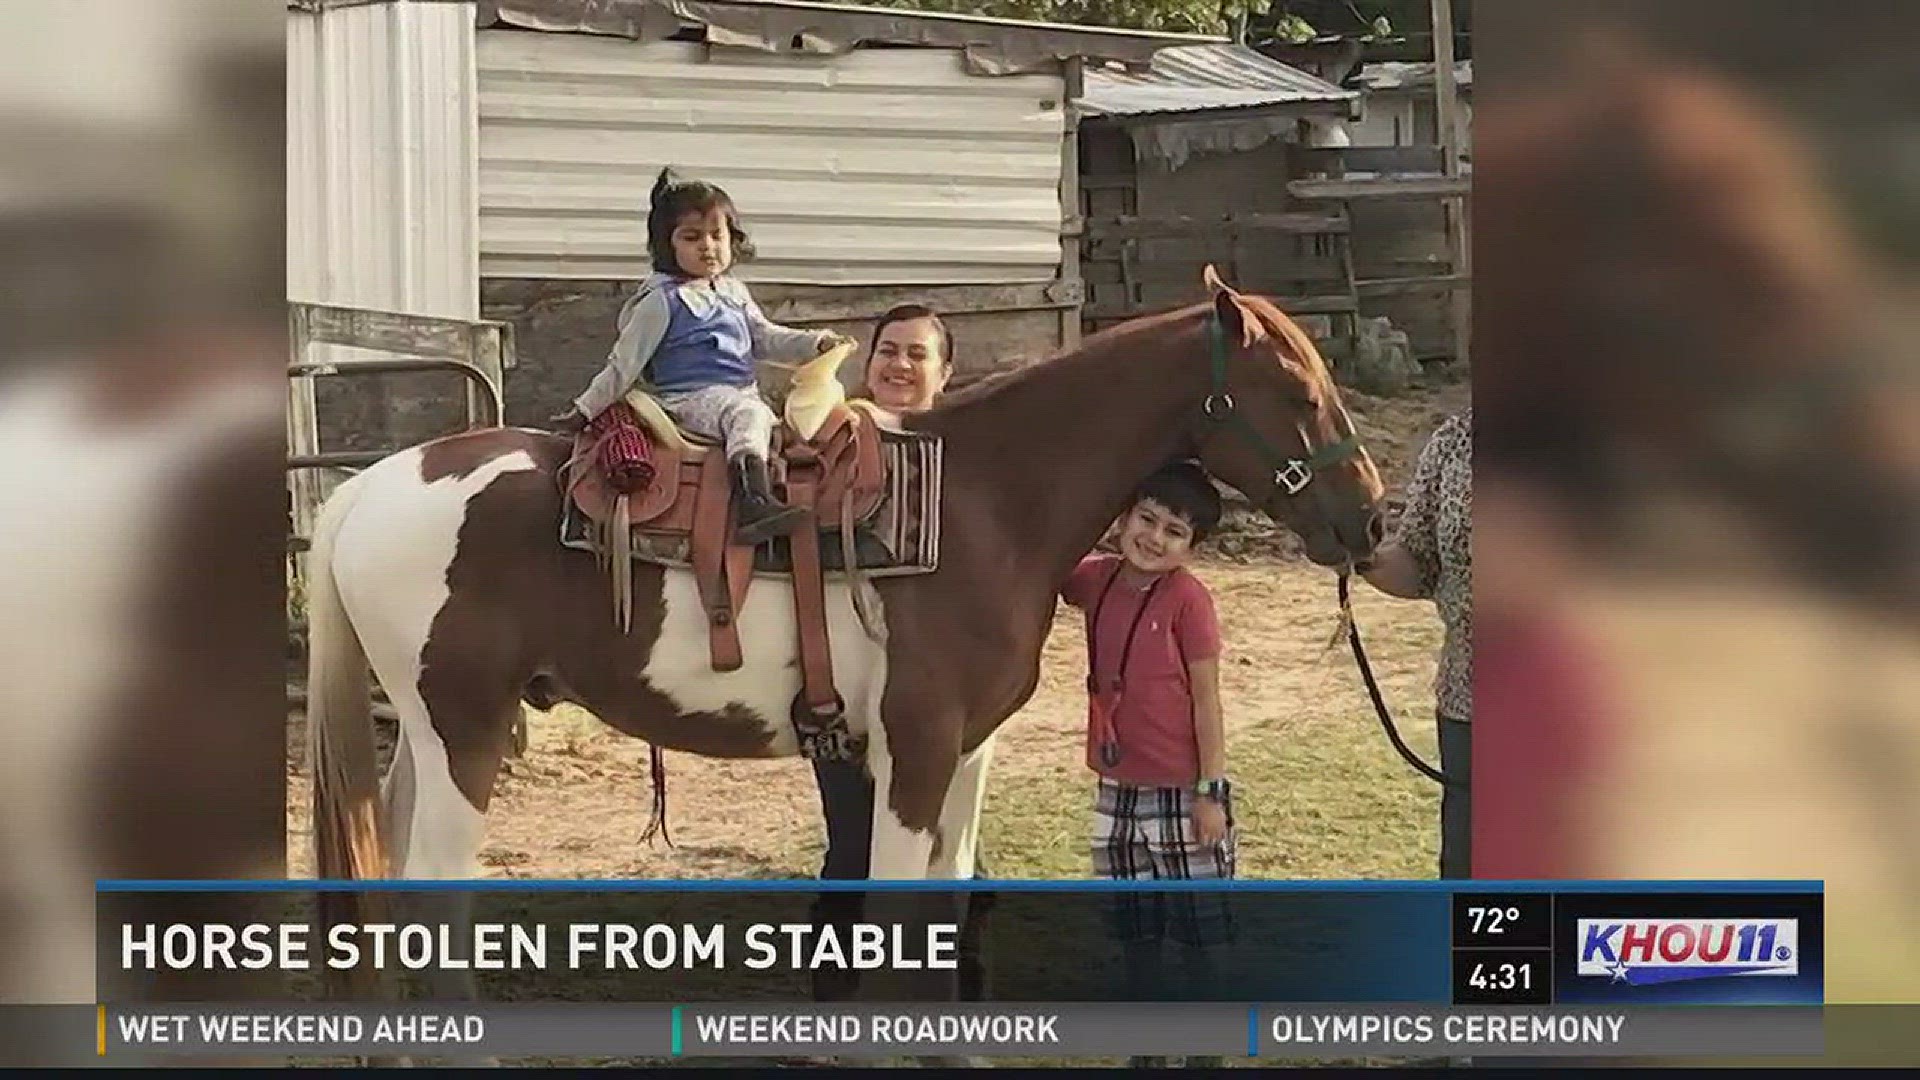 A Houston man, who says his horse was stolen earlier this week, believes there's an uptick in horse thefts when rodeo season rolls around. Night vision cameras caught only a few images of the thief who took Barry and left another horse tied up outside.